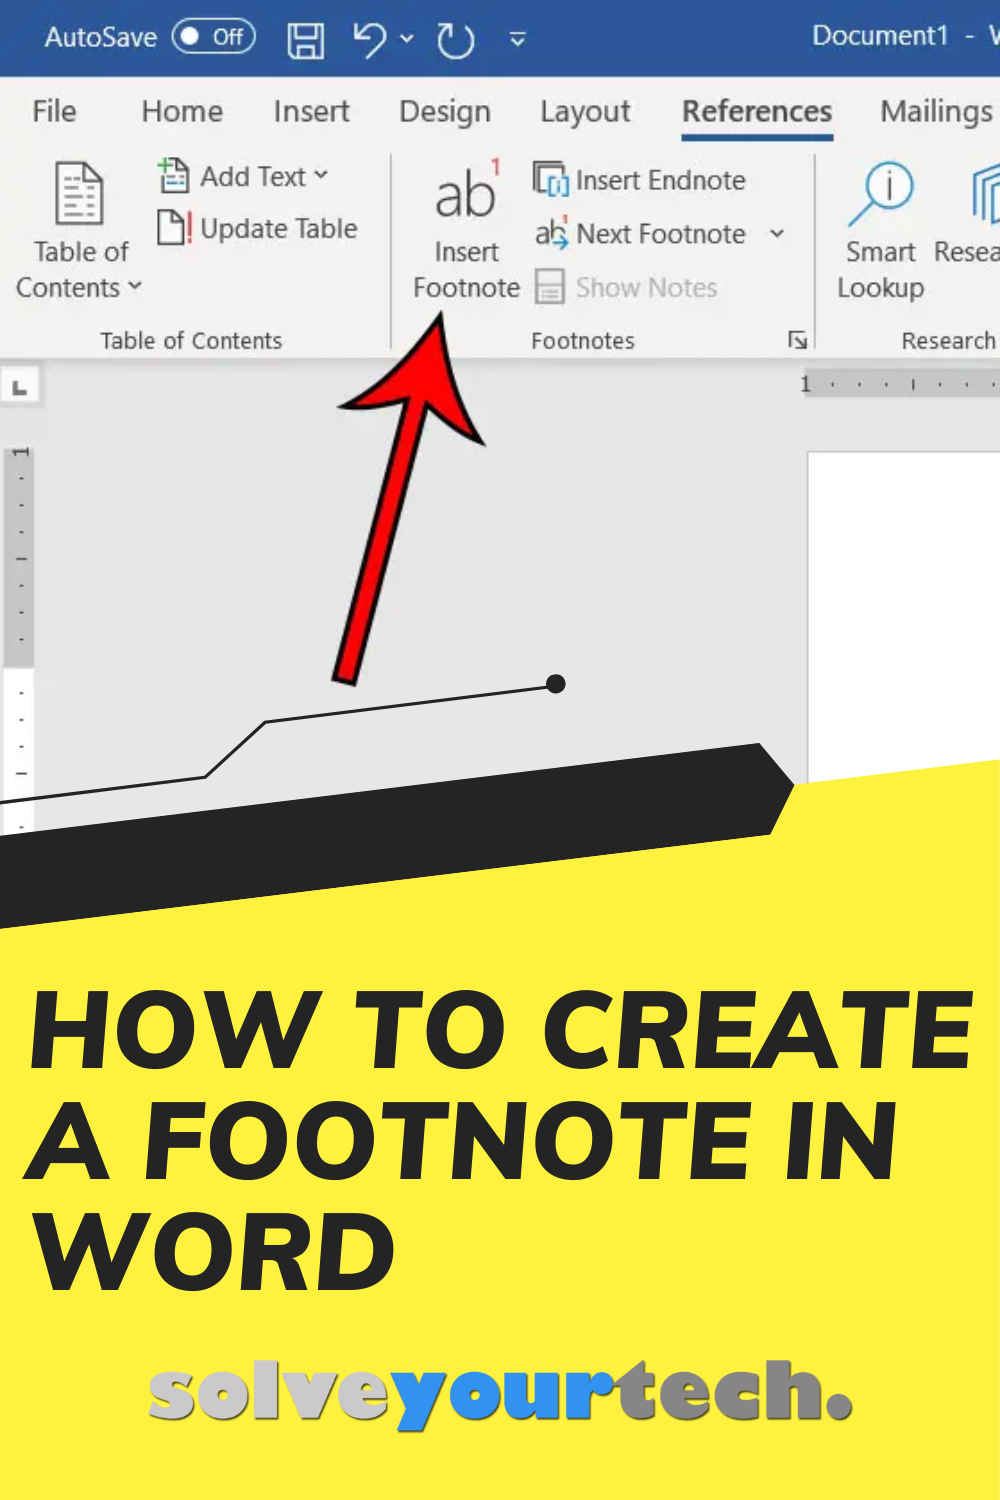 where to insert footnote